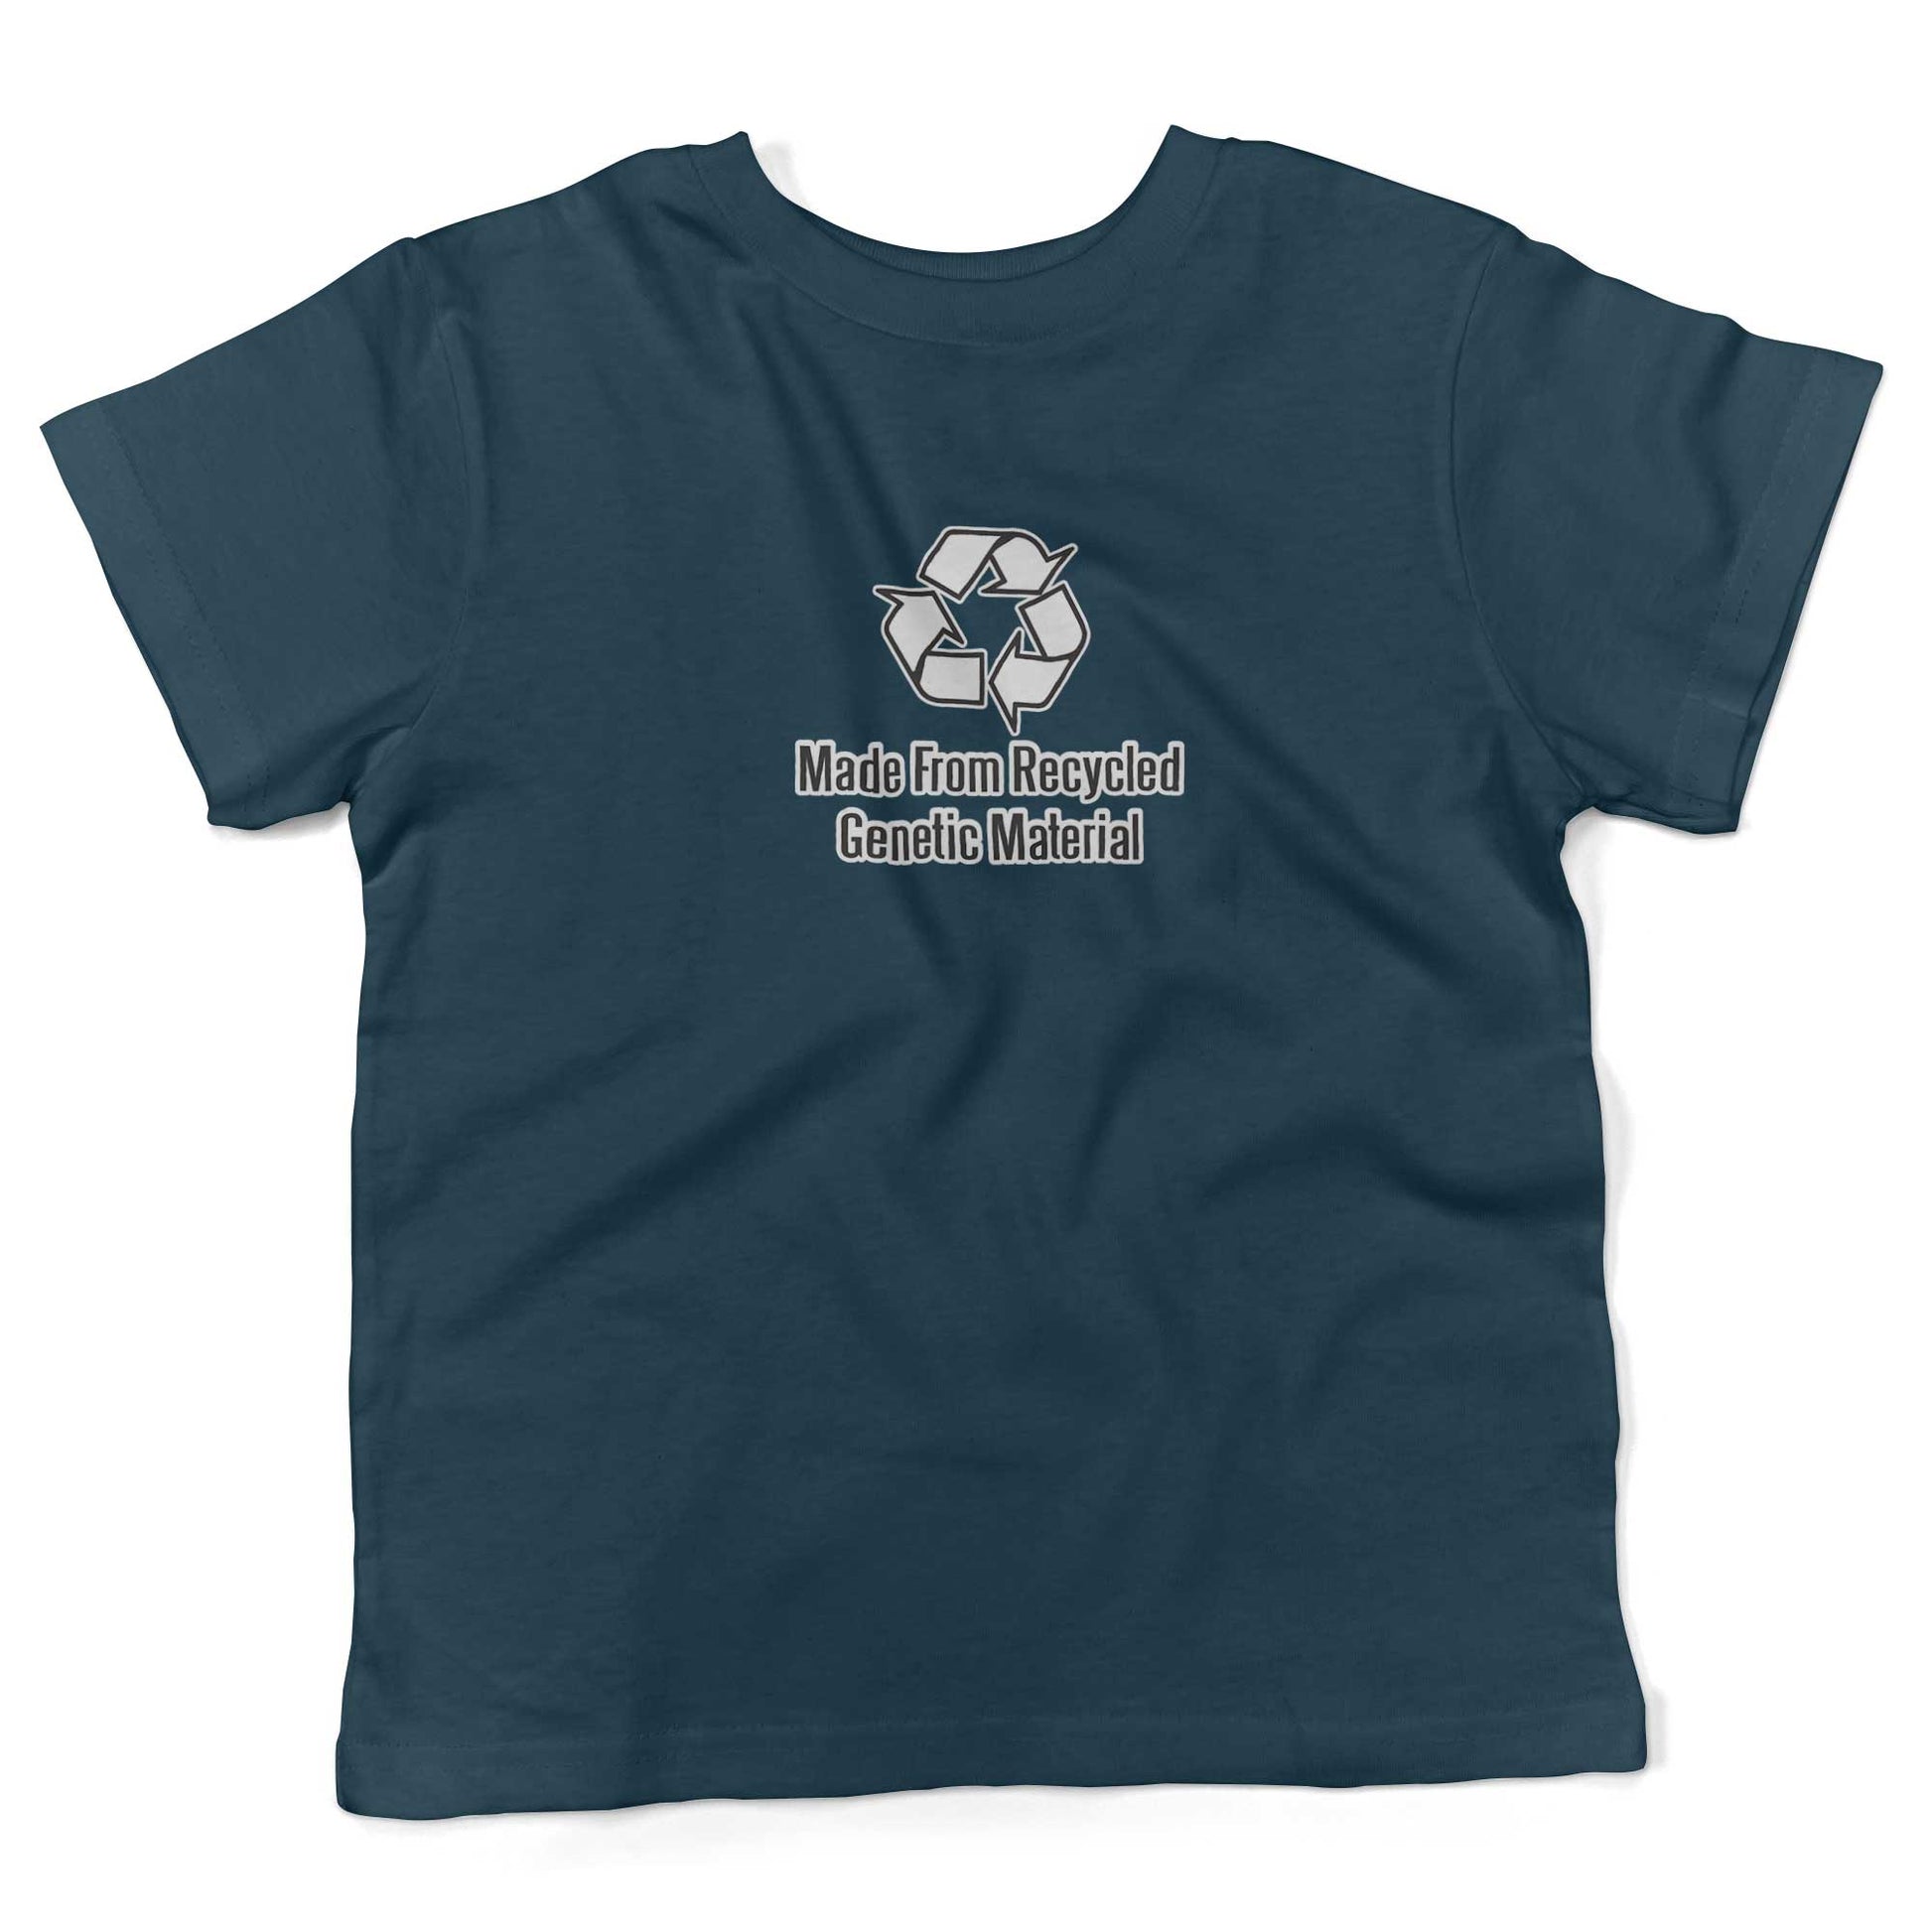 Made From Recycled Materials Toddler Shirt-Organic Pacific Blue-2T